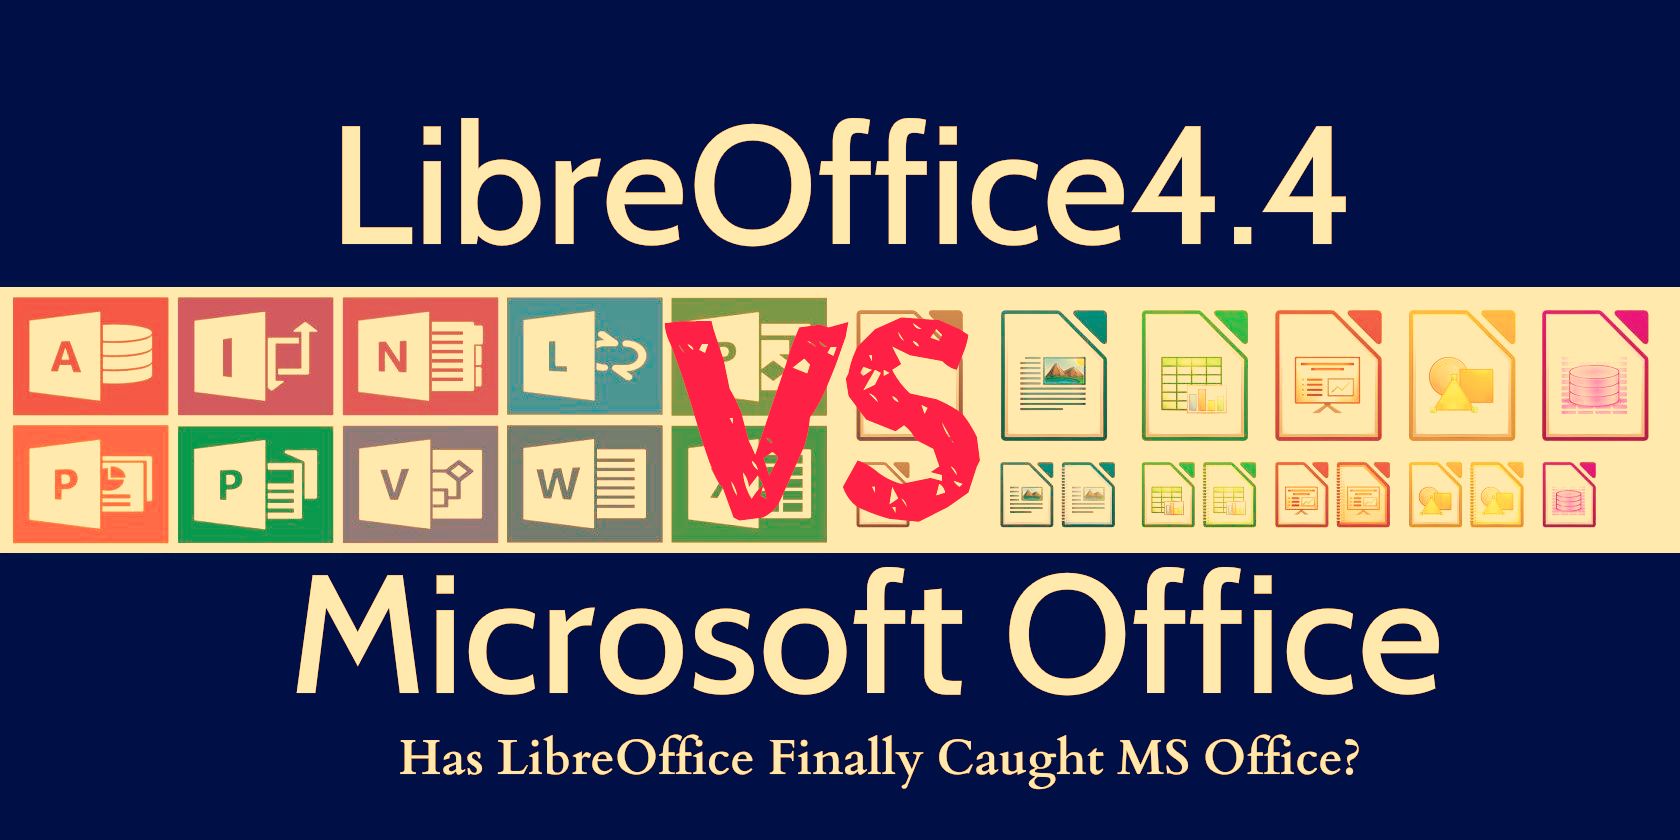 which is better openoffice or libreoffice openoffice